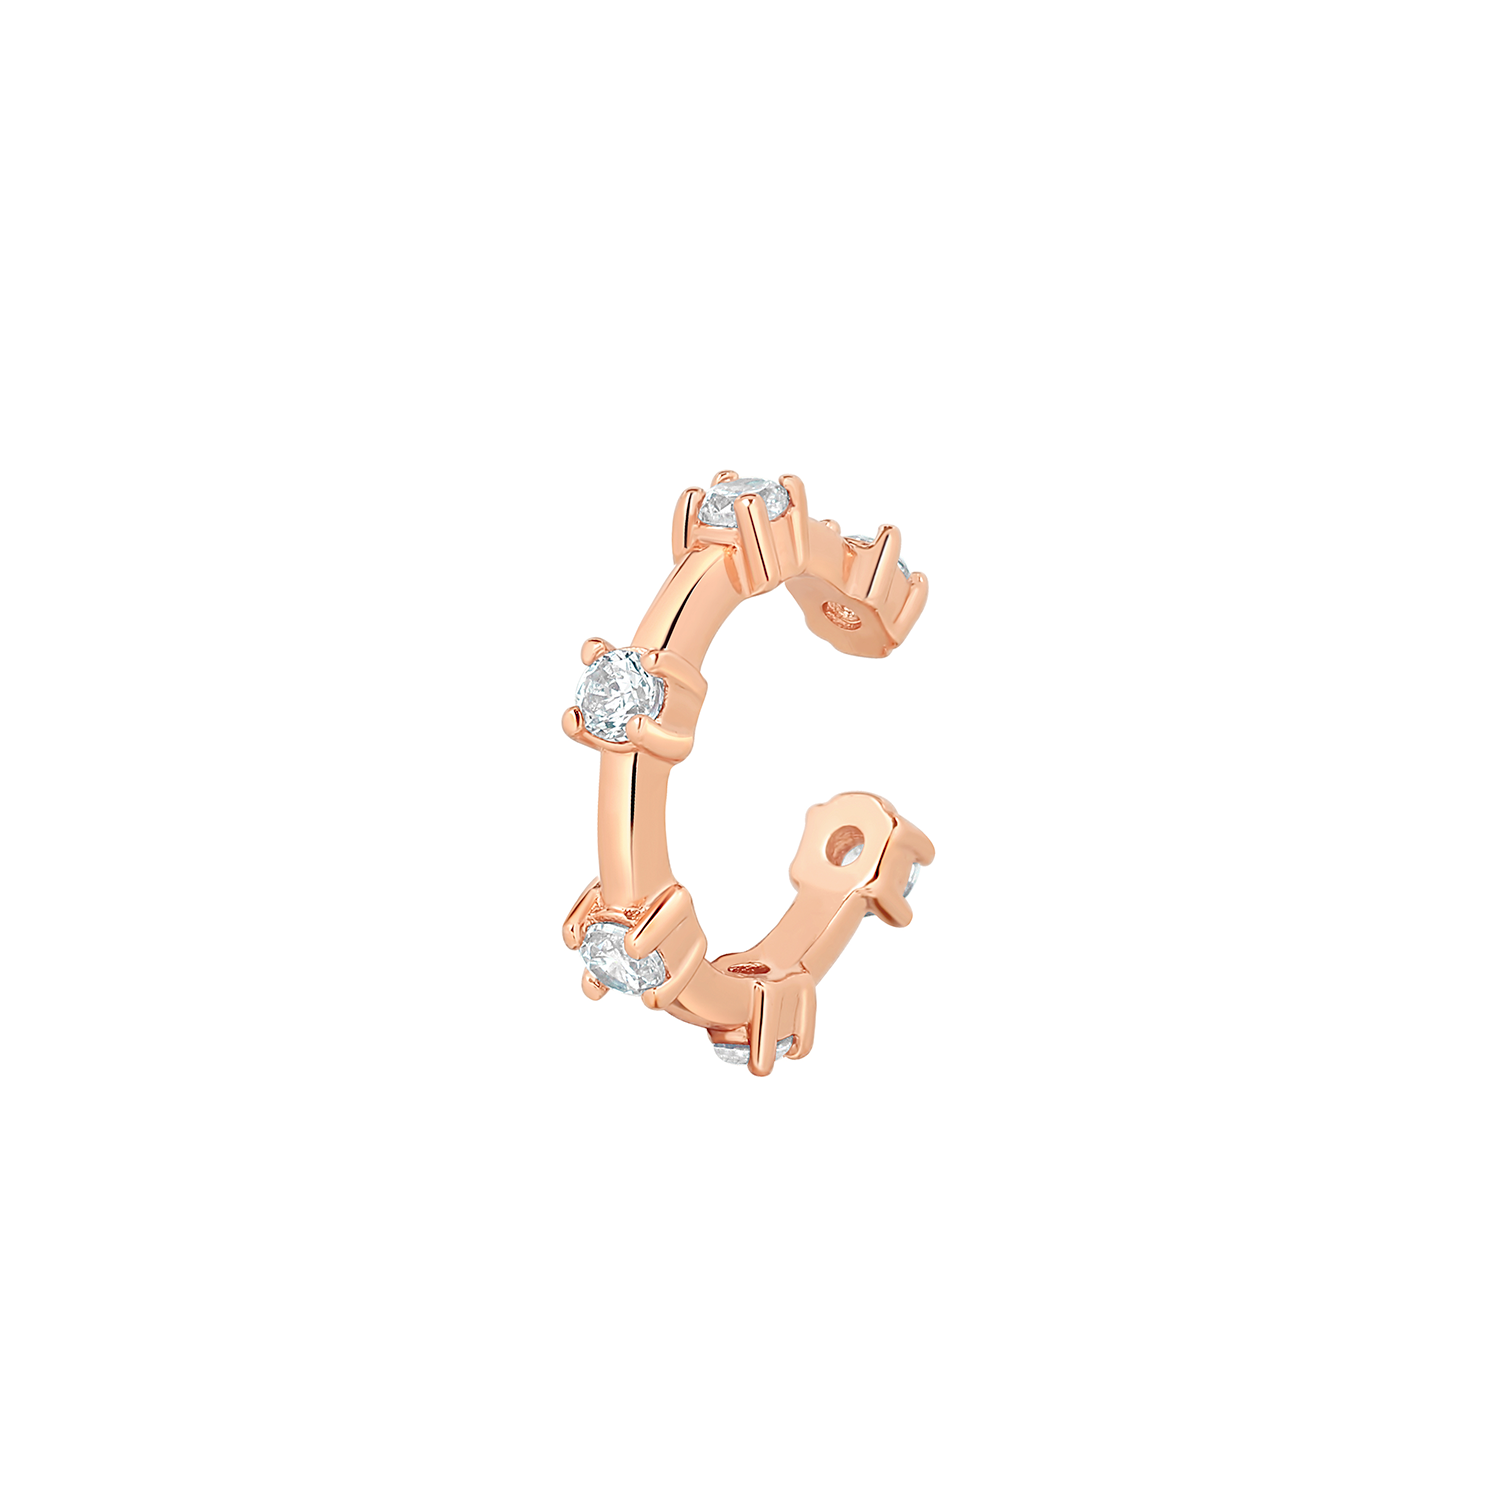 Elegant and statement rose gold ear cuff set with cubic zirconia stones.